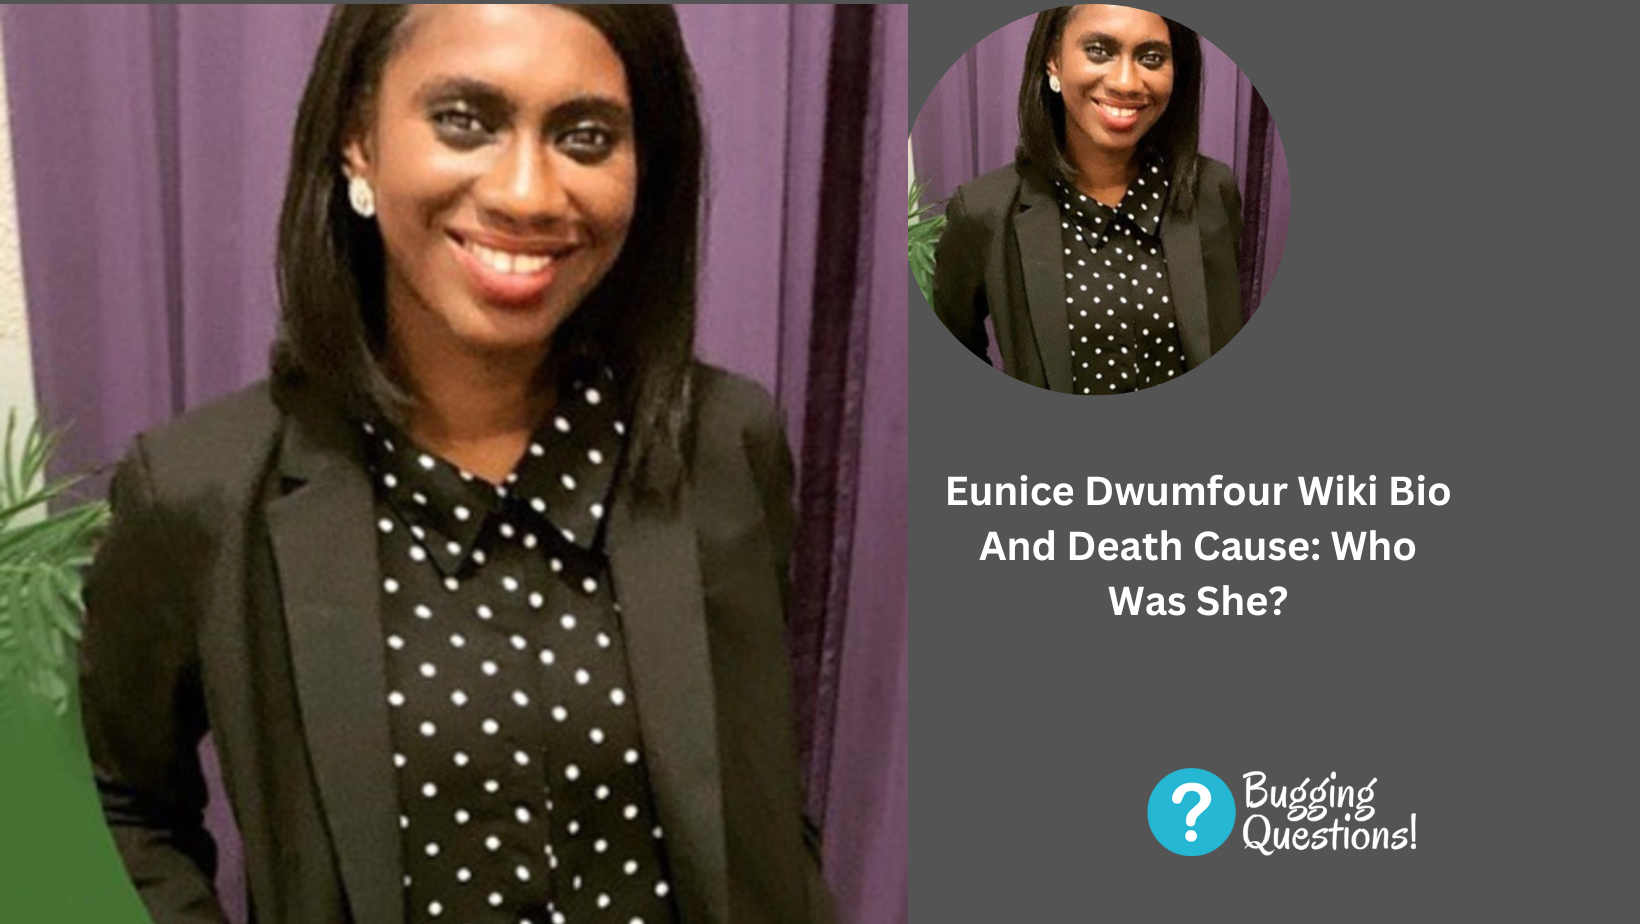 Eunice Dwumfour Wiki Bio And Death Cause: Who Was She?